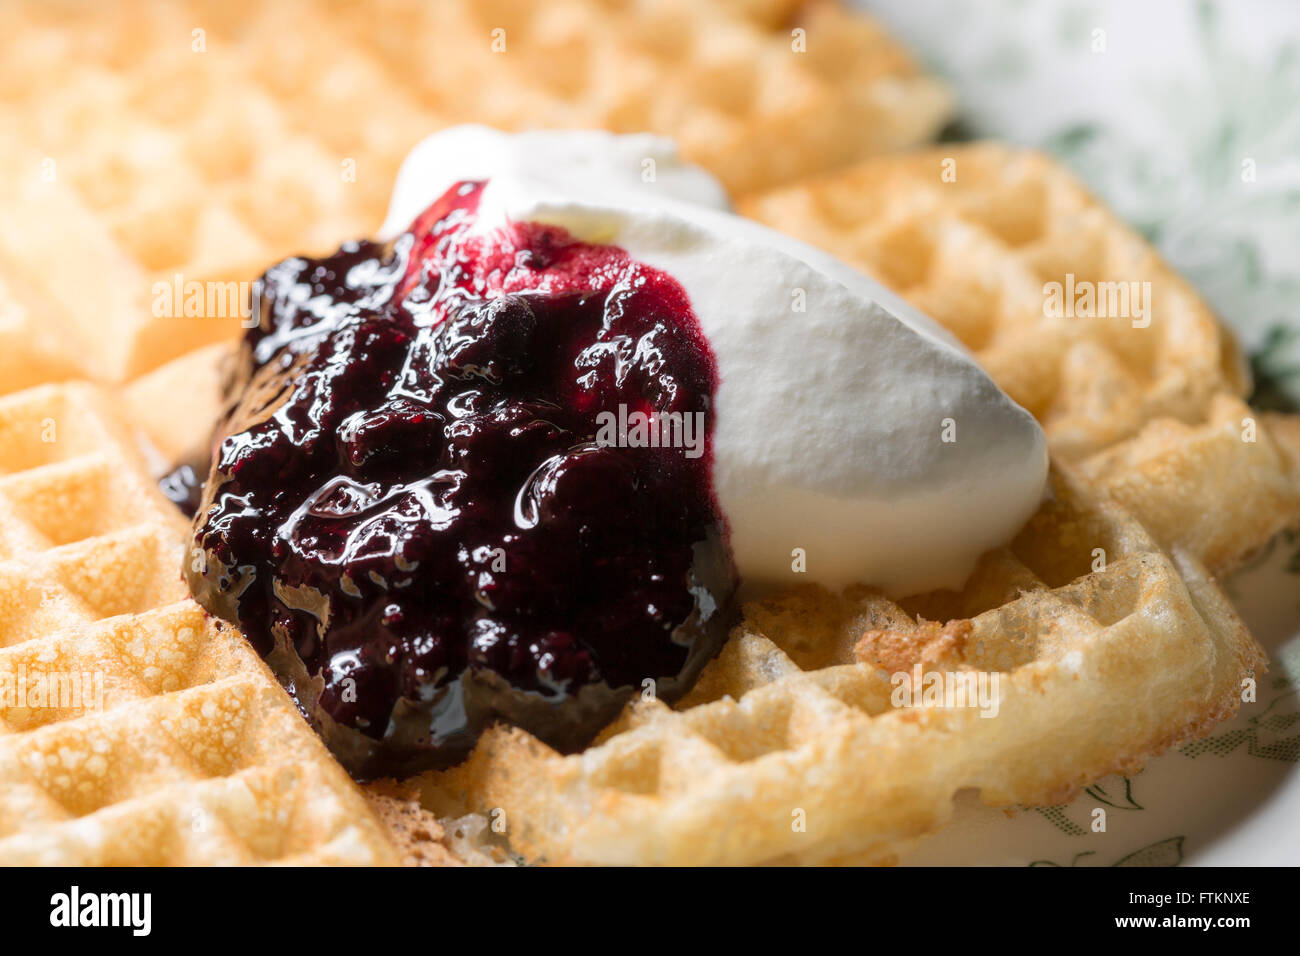 Waffle with Blueberry Jam and Whipped Cream Stock Photo